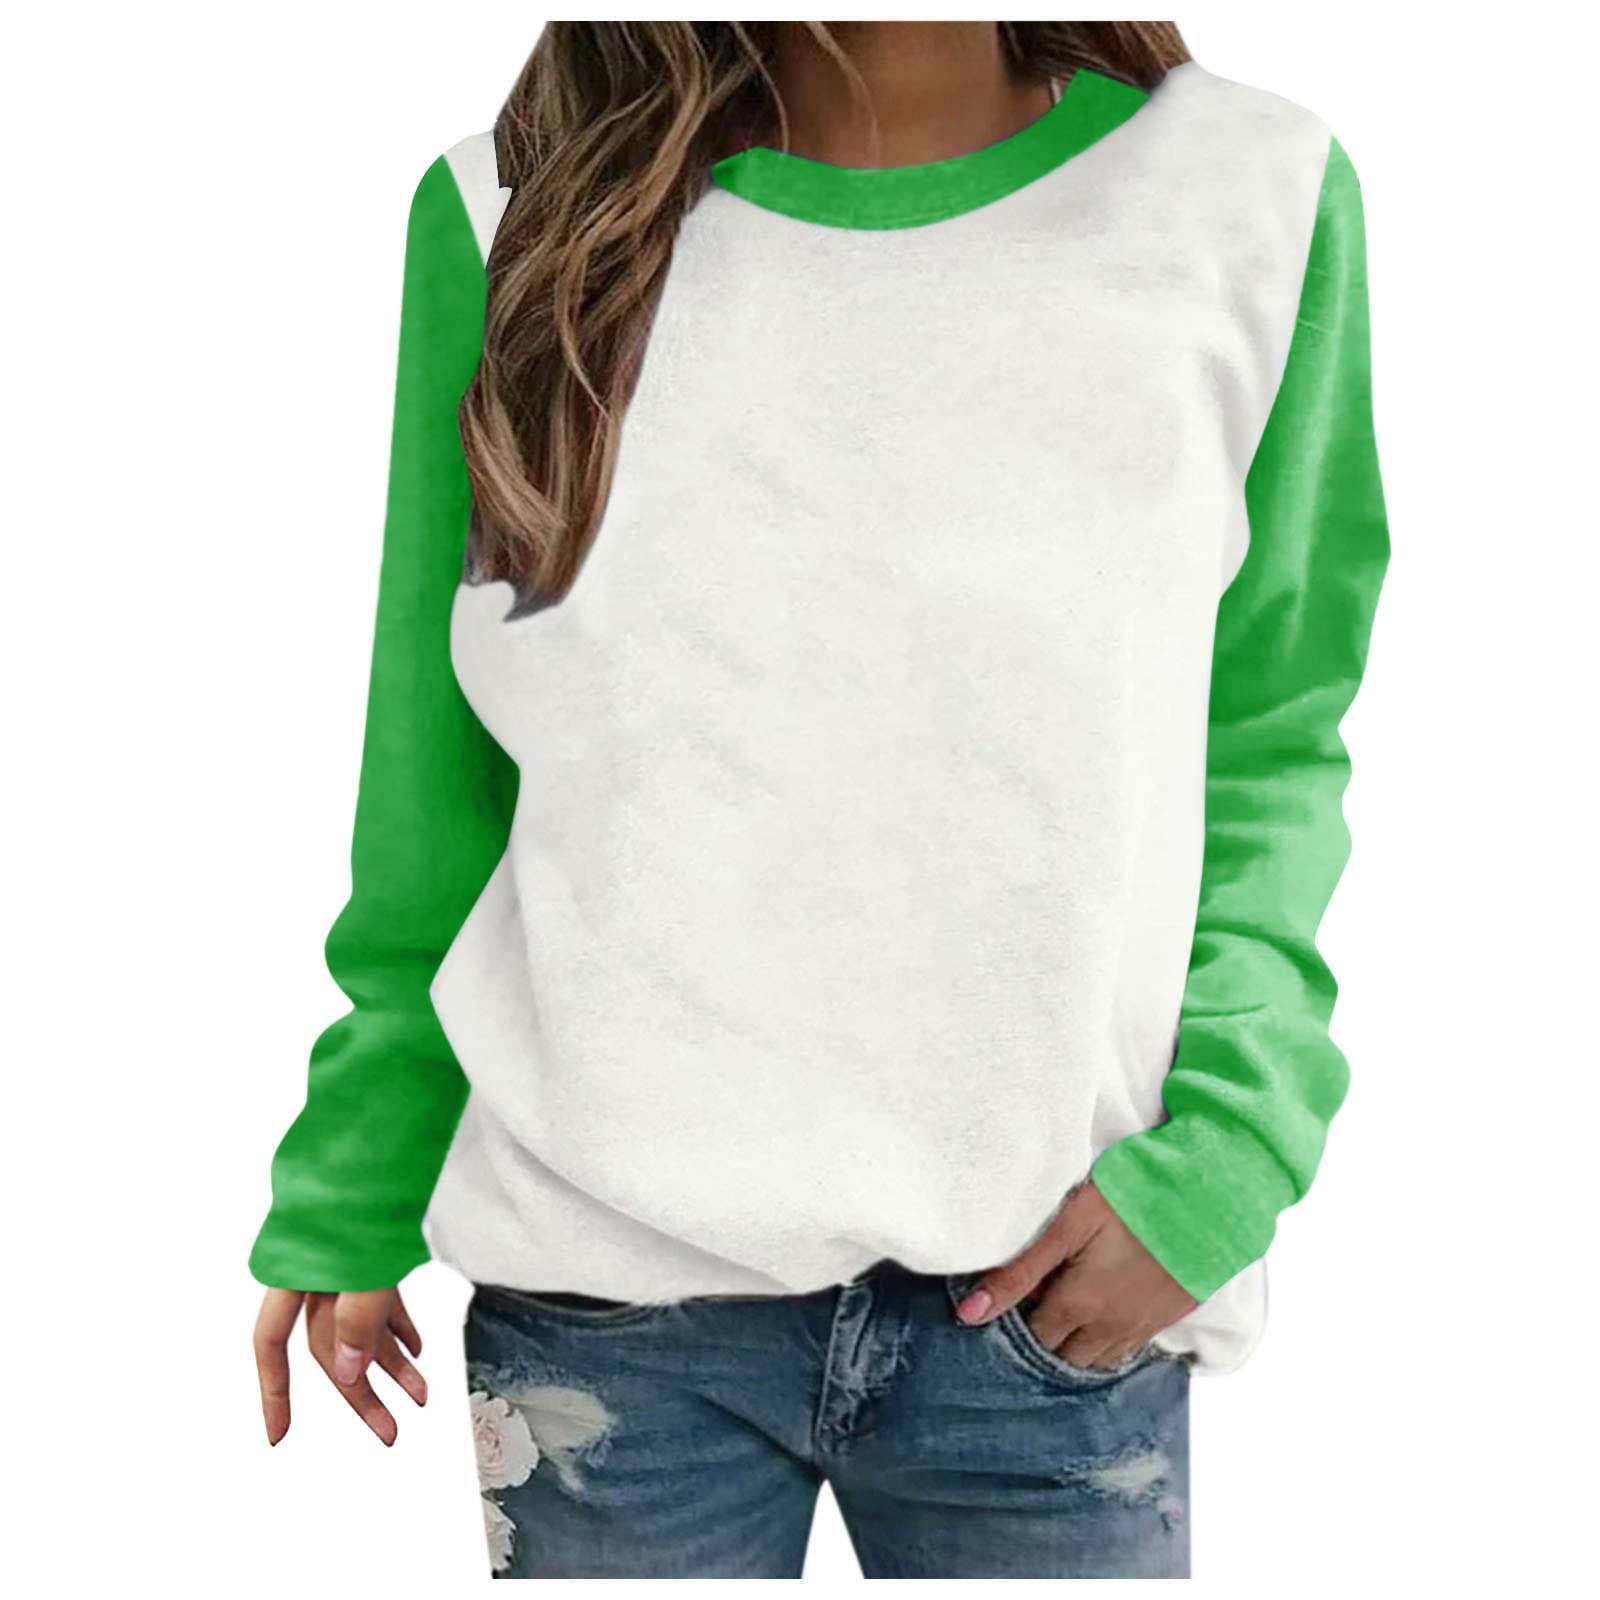 Warehouse Open Box Deals Clearance Trendy Blouses For Women 2023 Loose Fit  Long Sleeve Pullover Casual Crewneck Sweatshirts Novelty Marble Print Tops  Women's Crewneck Sweatshirts